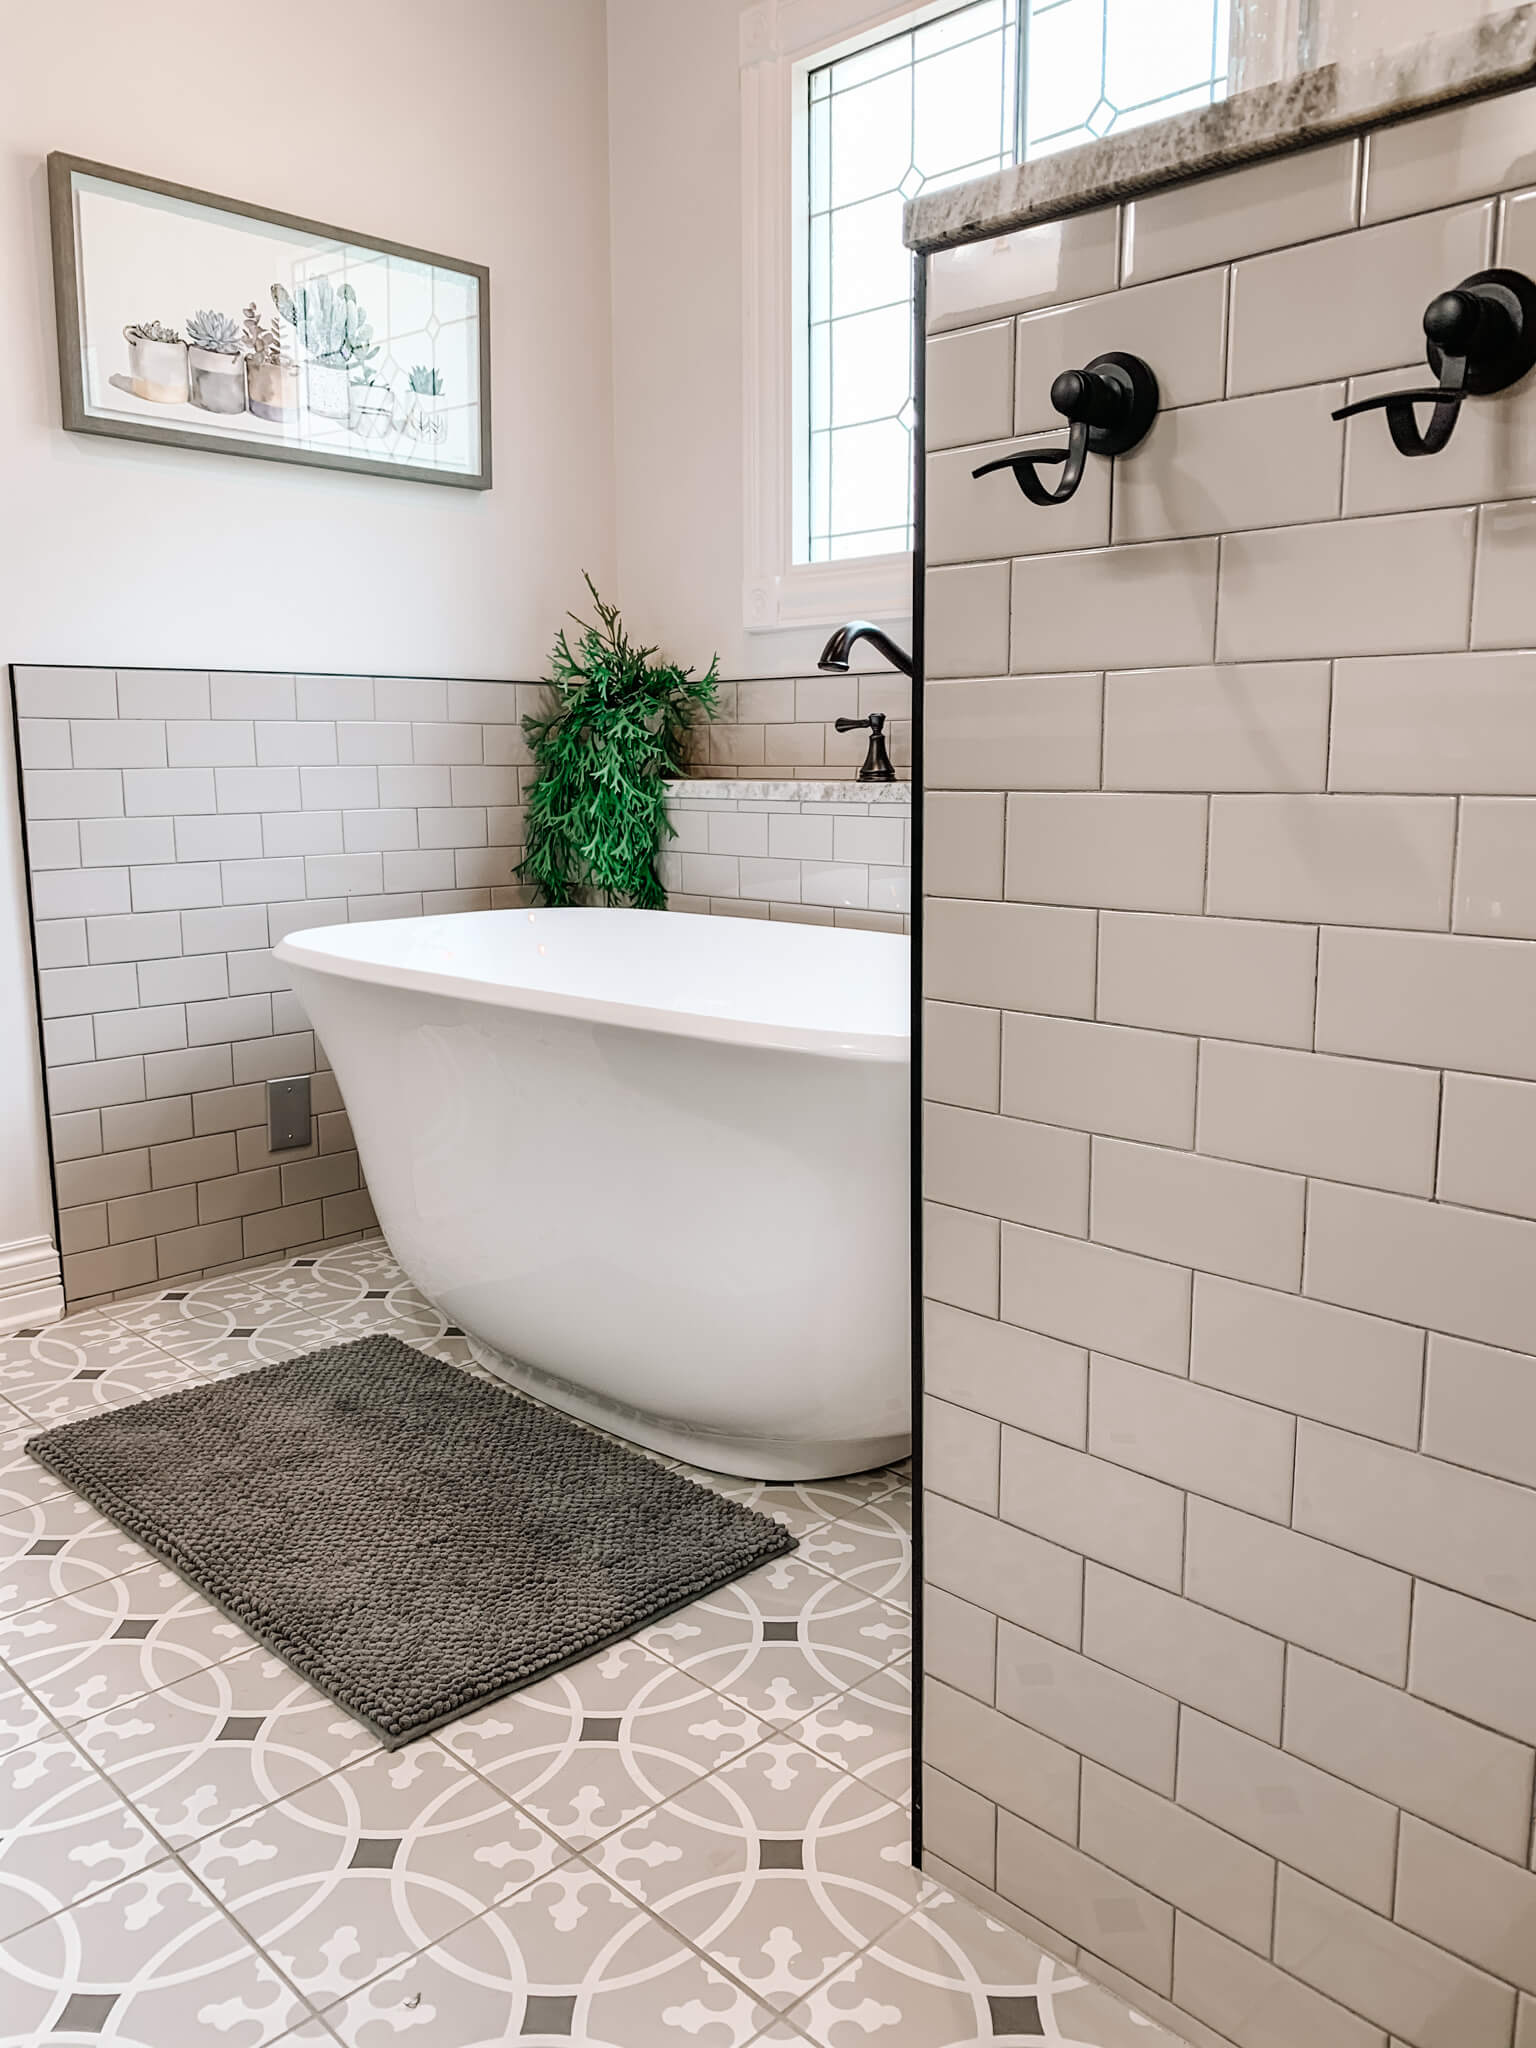 Bathroom Remodel - Showers, Tubs, and Toilets